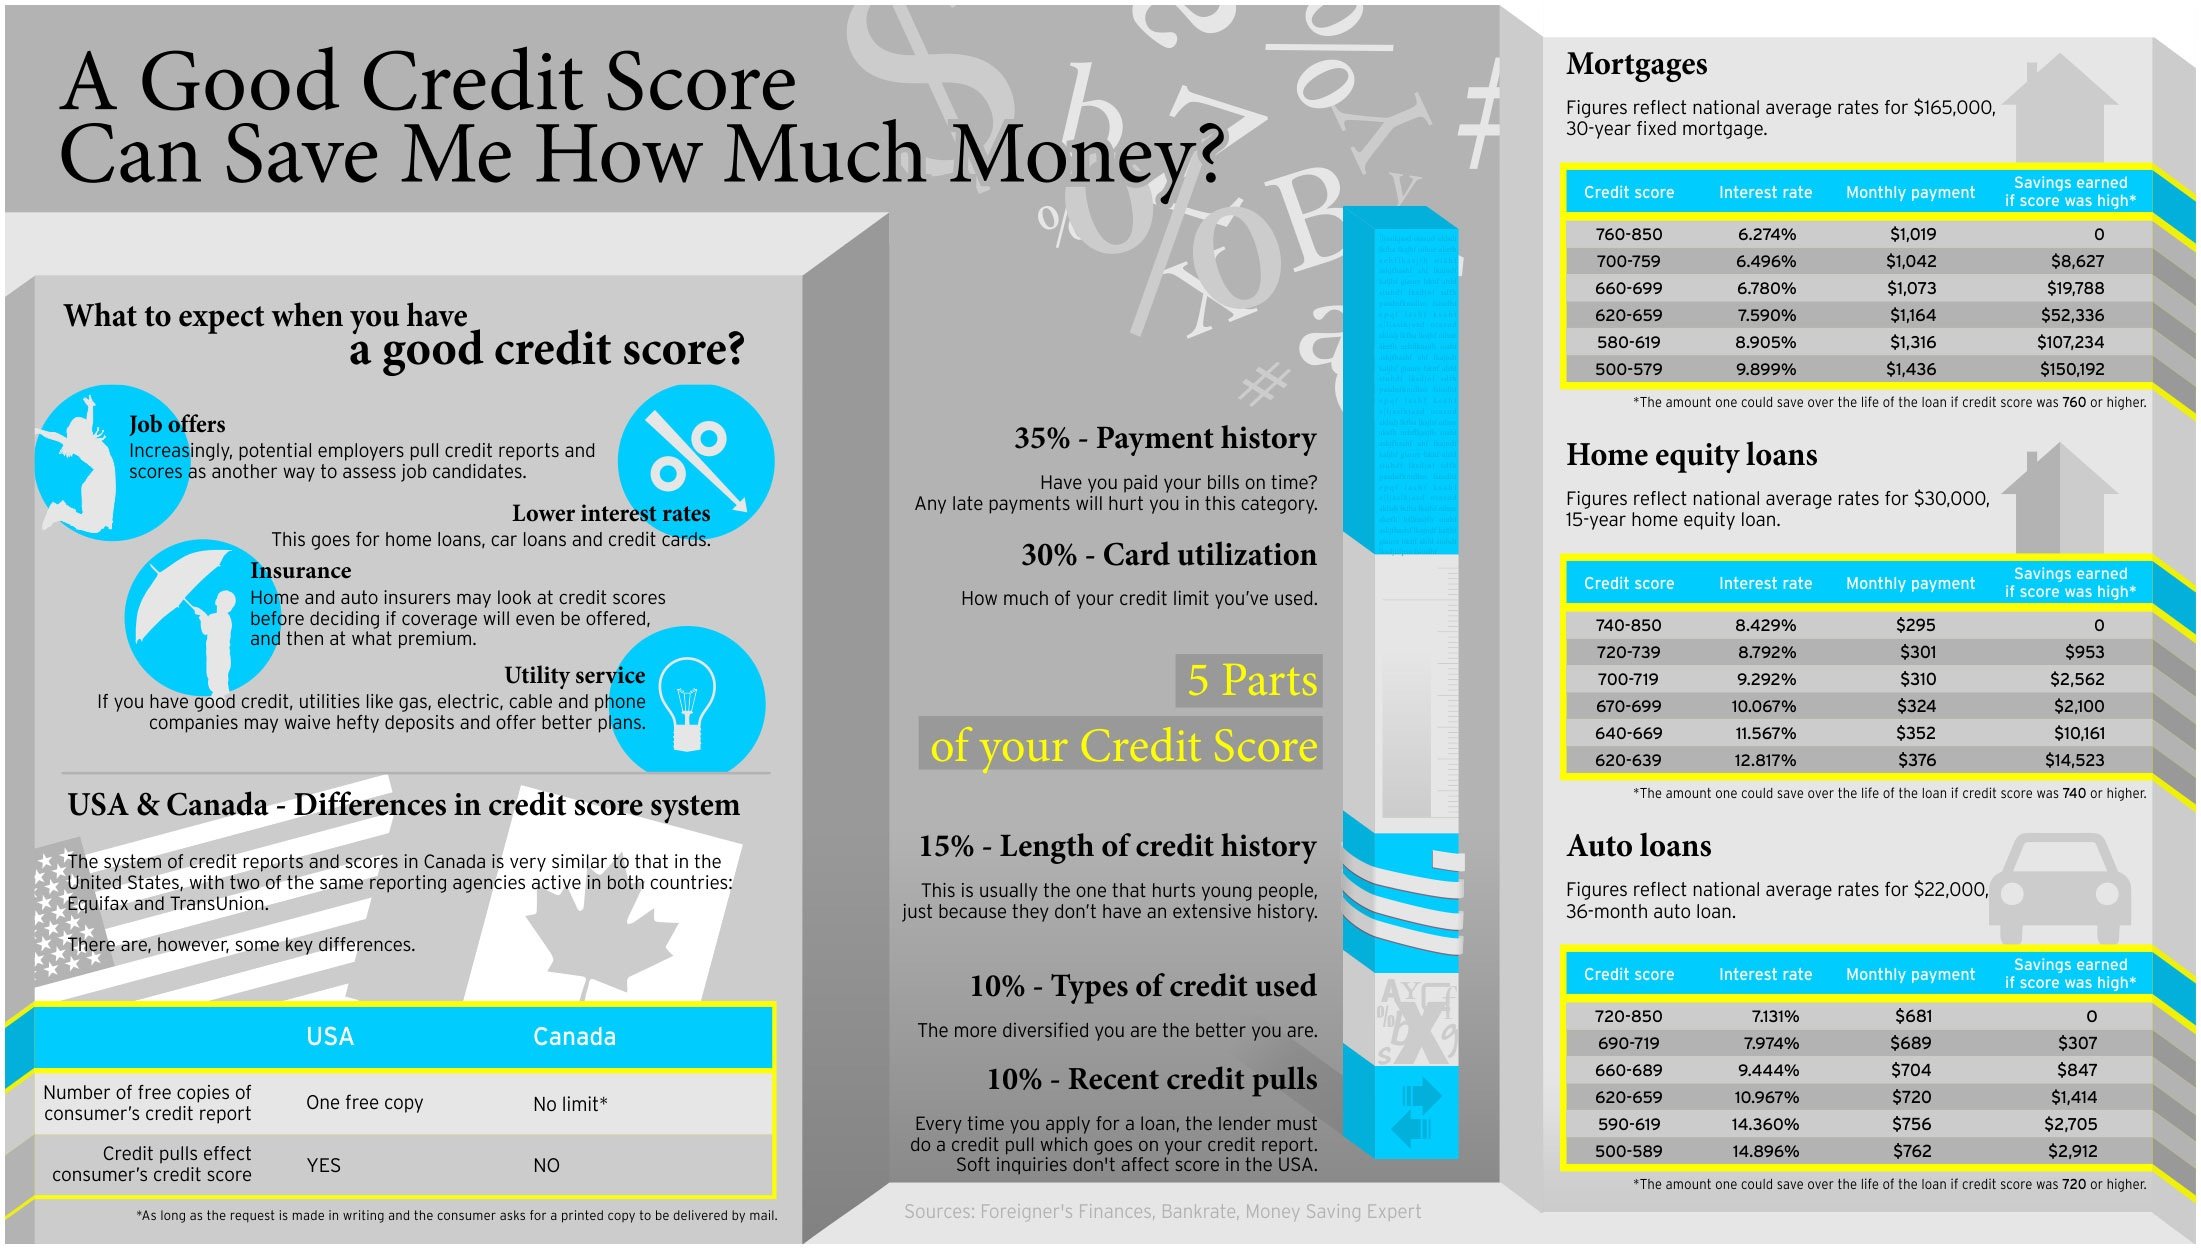 How A Good Credit Score Can Help You [Infographic]